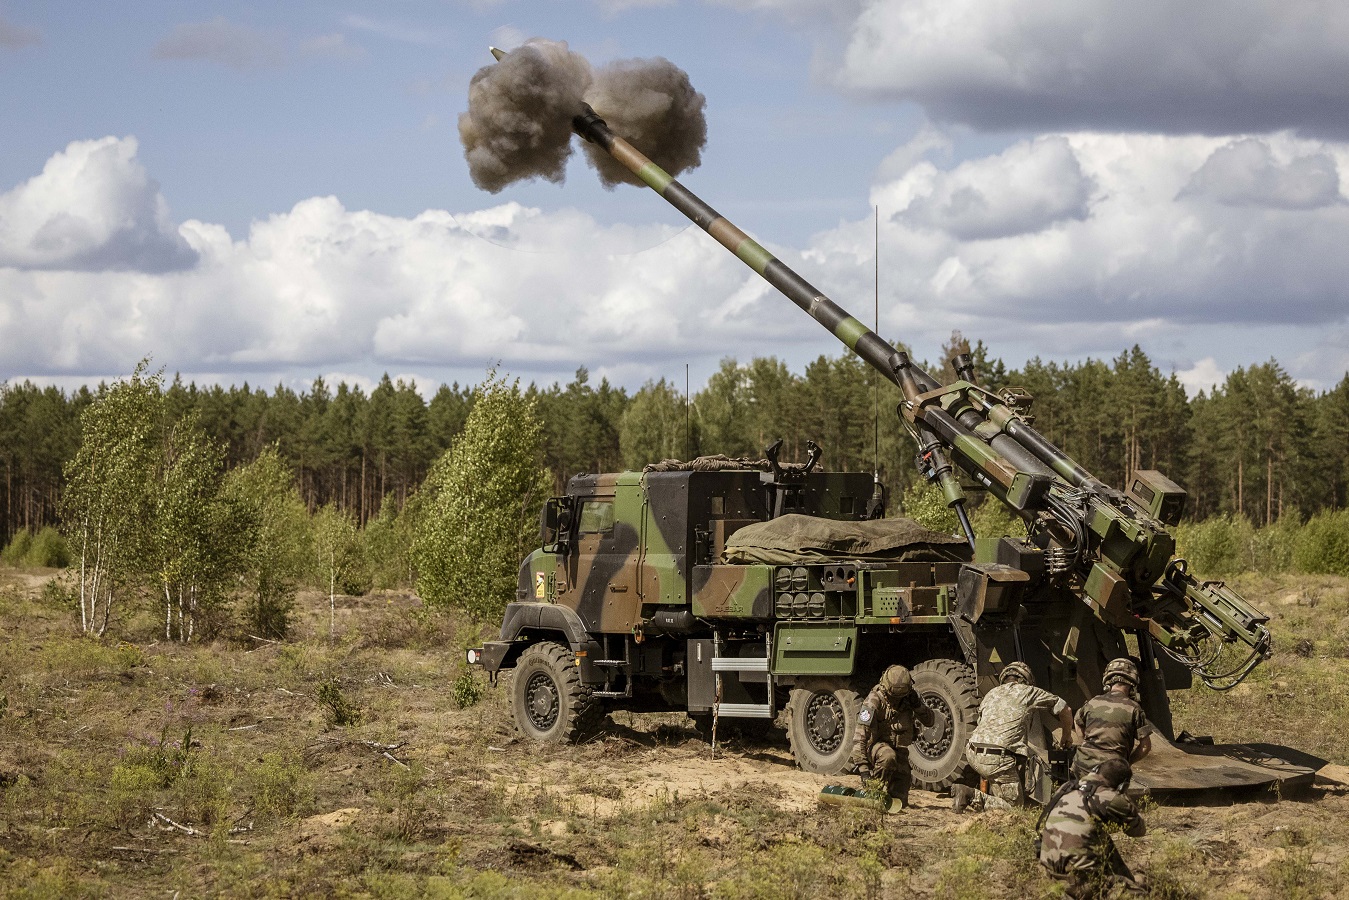 French-made Caesar Mark I Self-propelled Howitzers Completed Fire Tasks in Lithuania